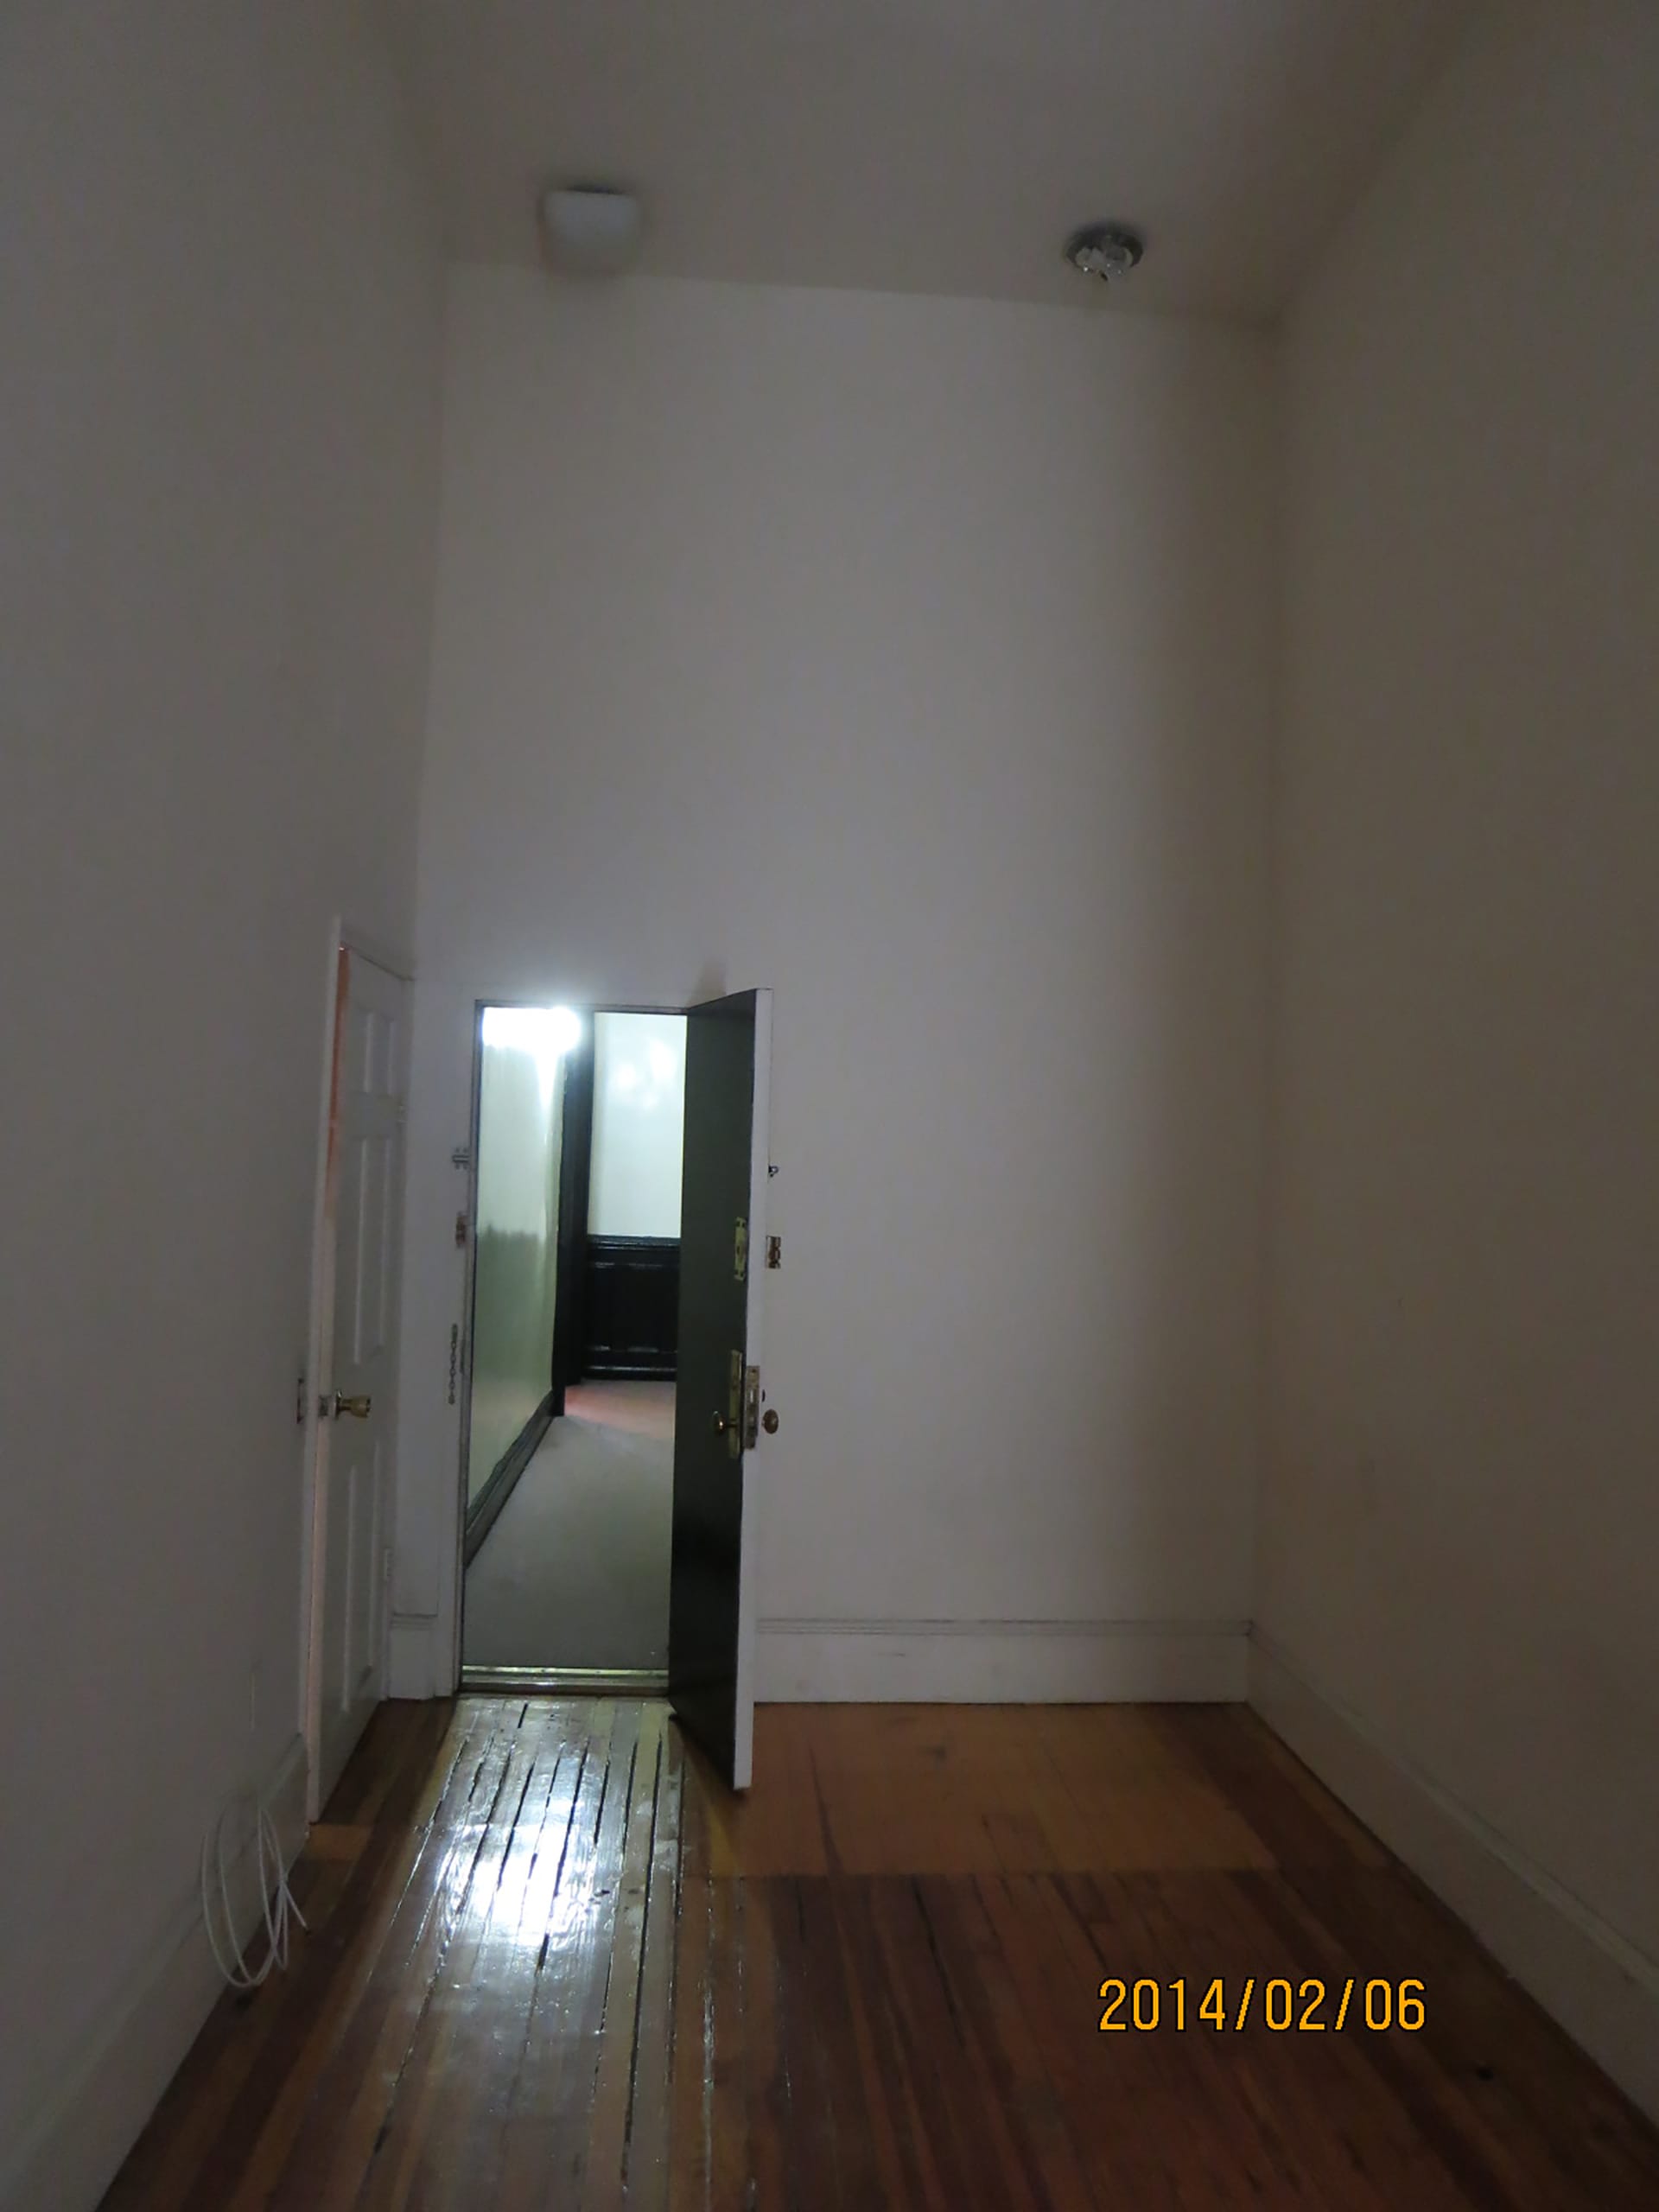 Stair hallway in a Brooklyn Heights Passive House before renovation.